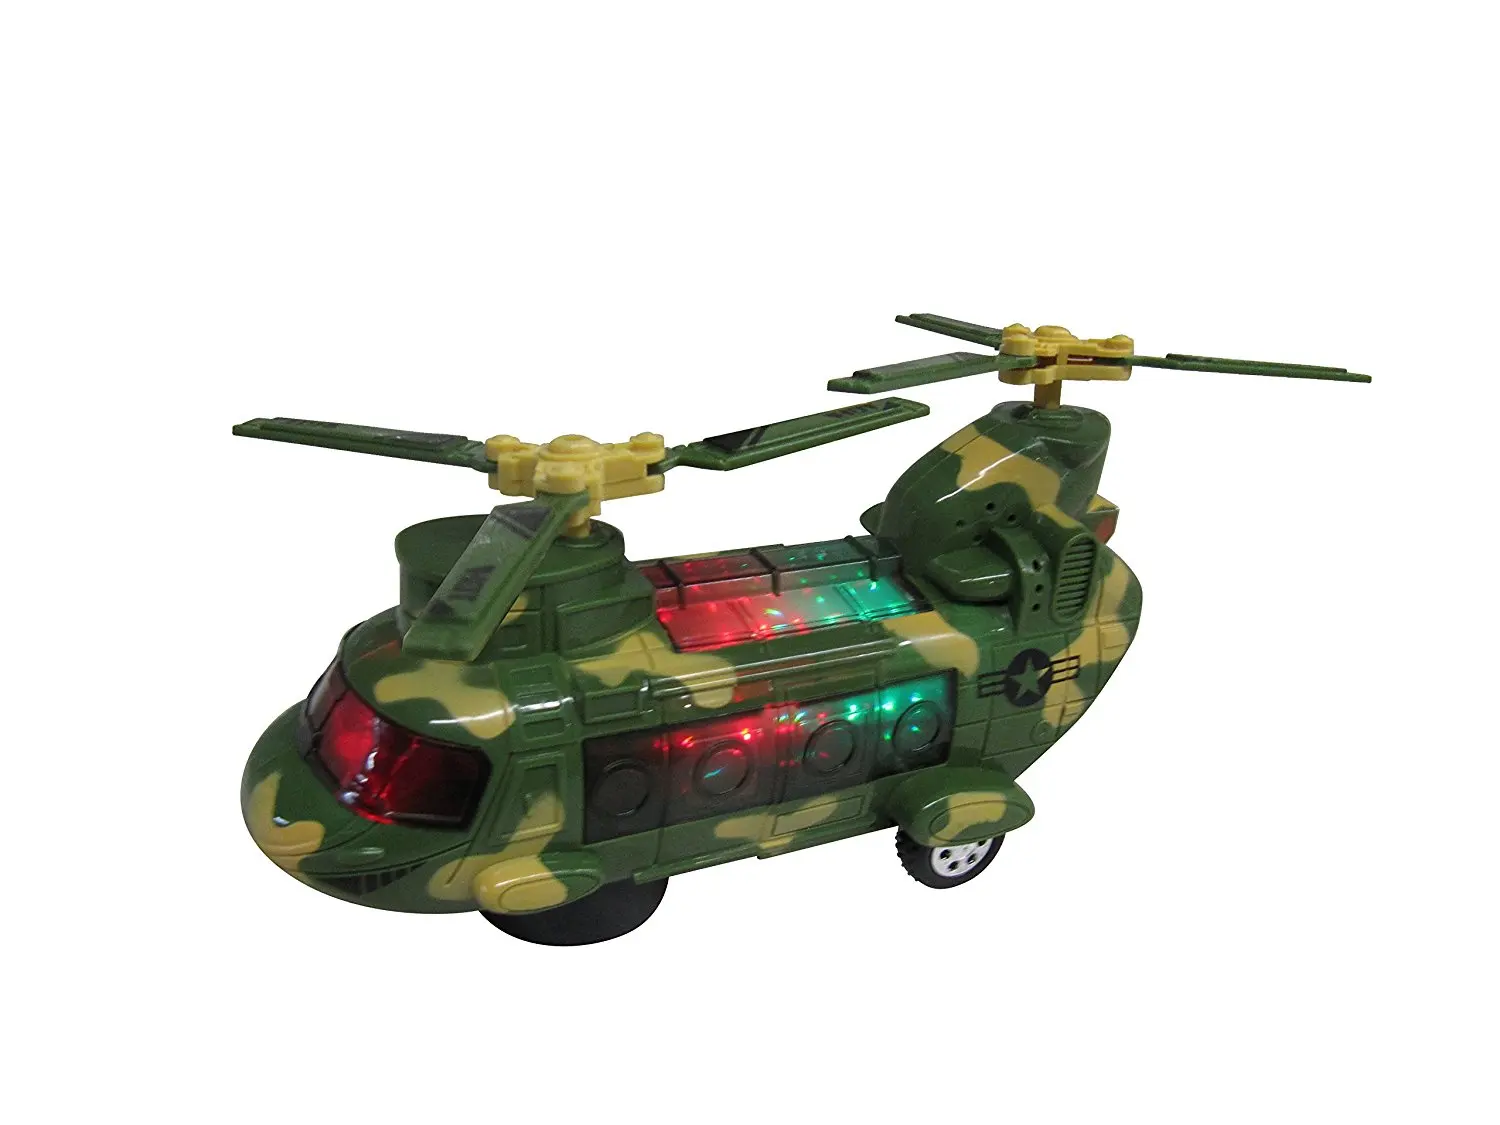 wolvol bump and go action electric military tank fighter toy with lights and sounds